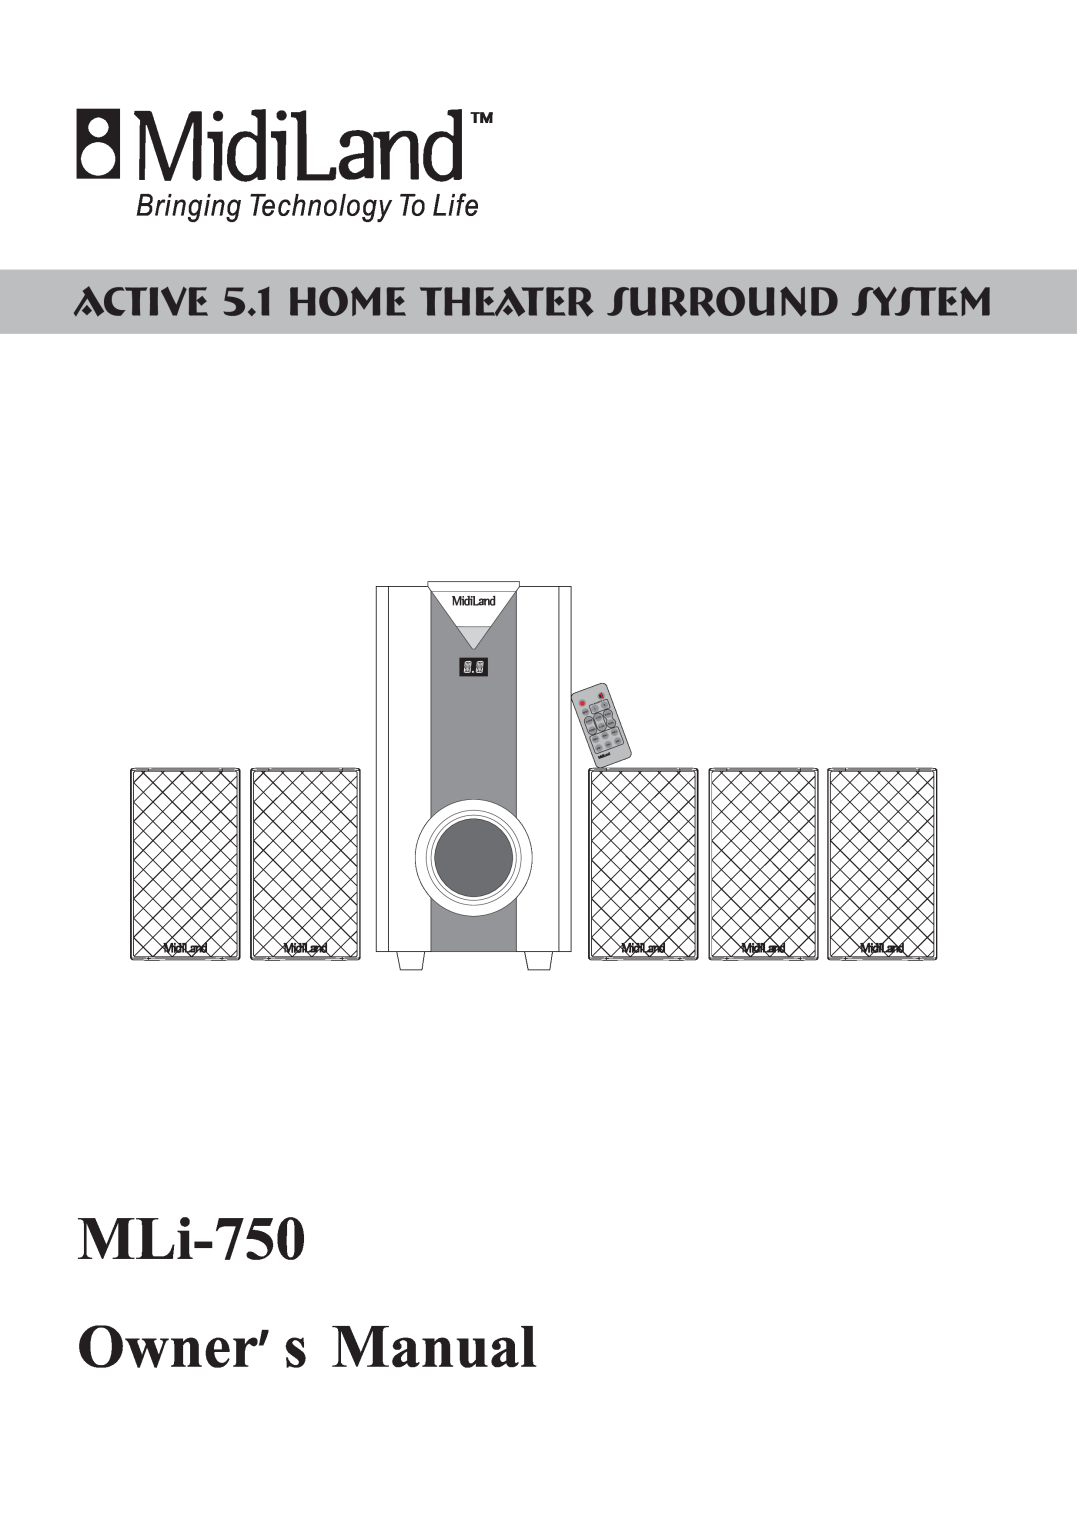 MidiLand 750 manual ACTIVE 5.1 HOME THEATER SURROUND SYSTEM, Bringing Technology To Life 